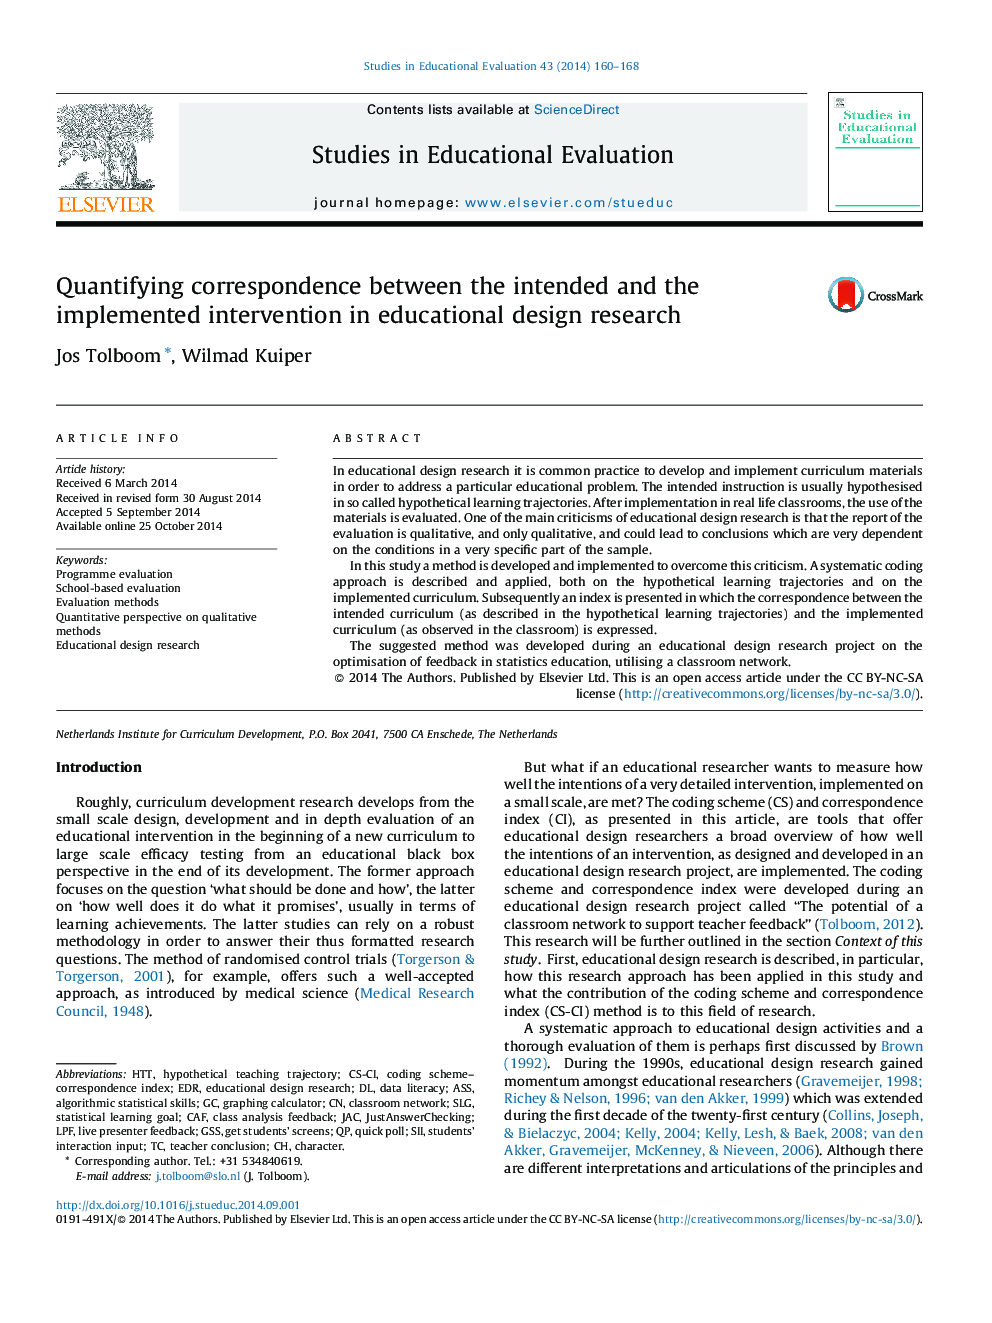 Quantifying correspondence between the intended and the implemented intervention in educational design research